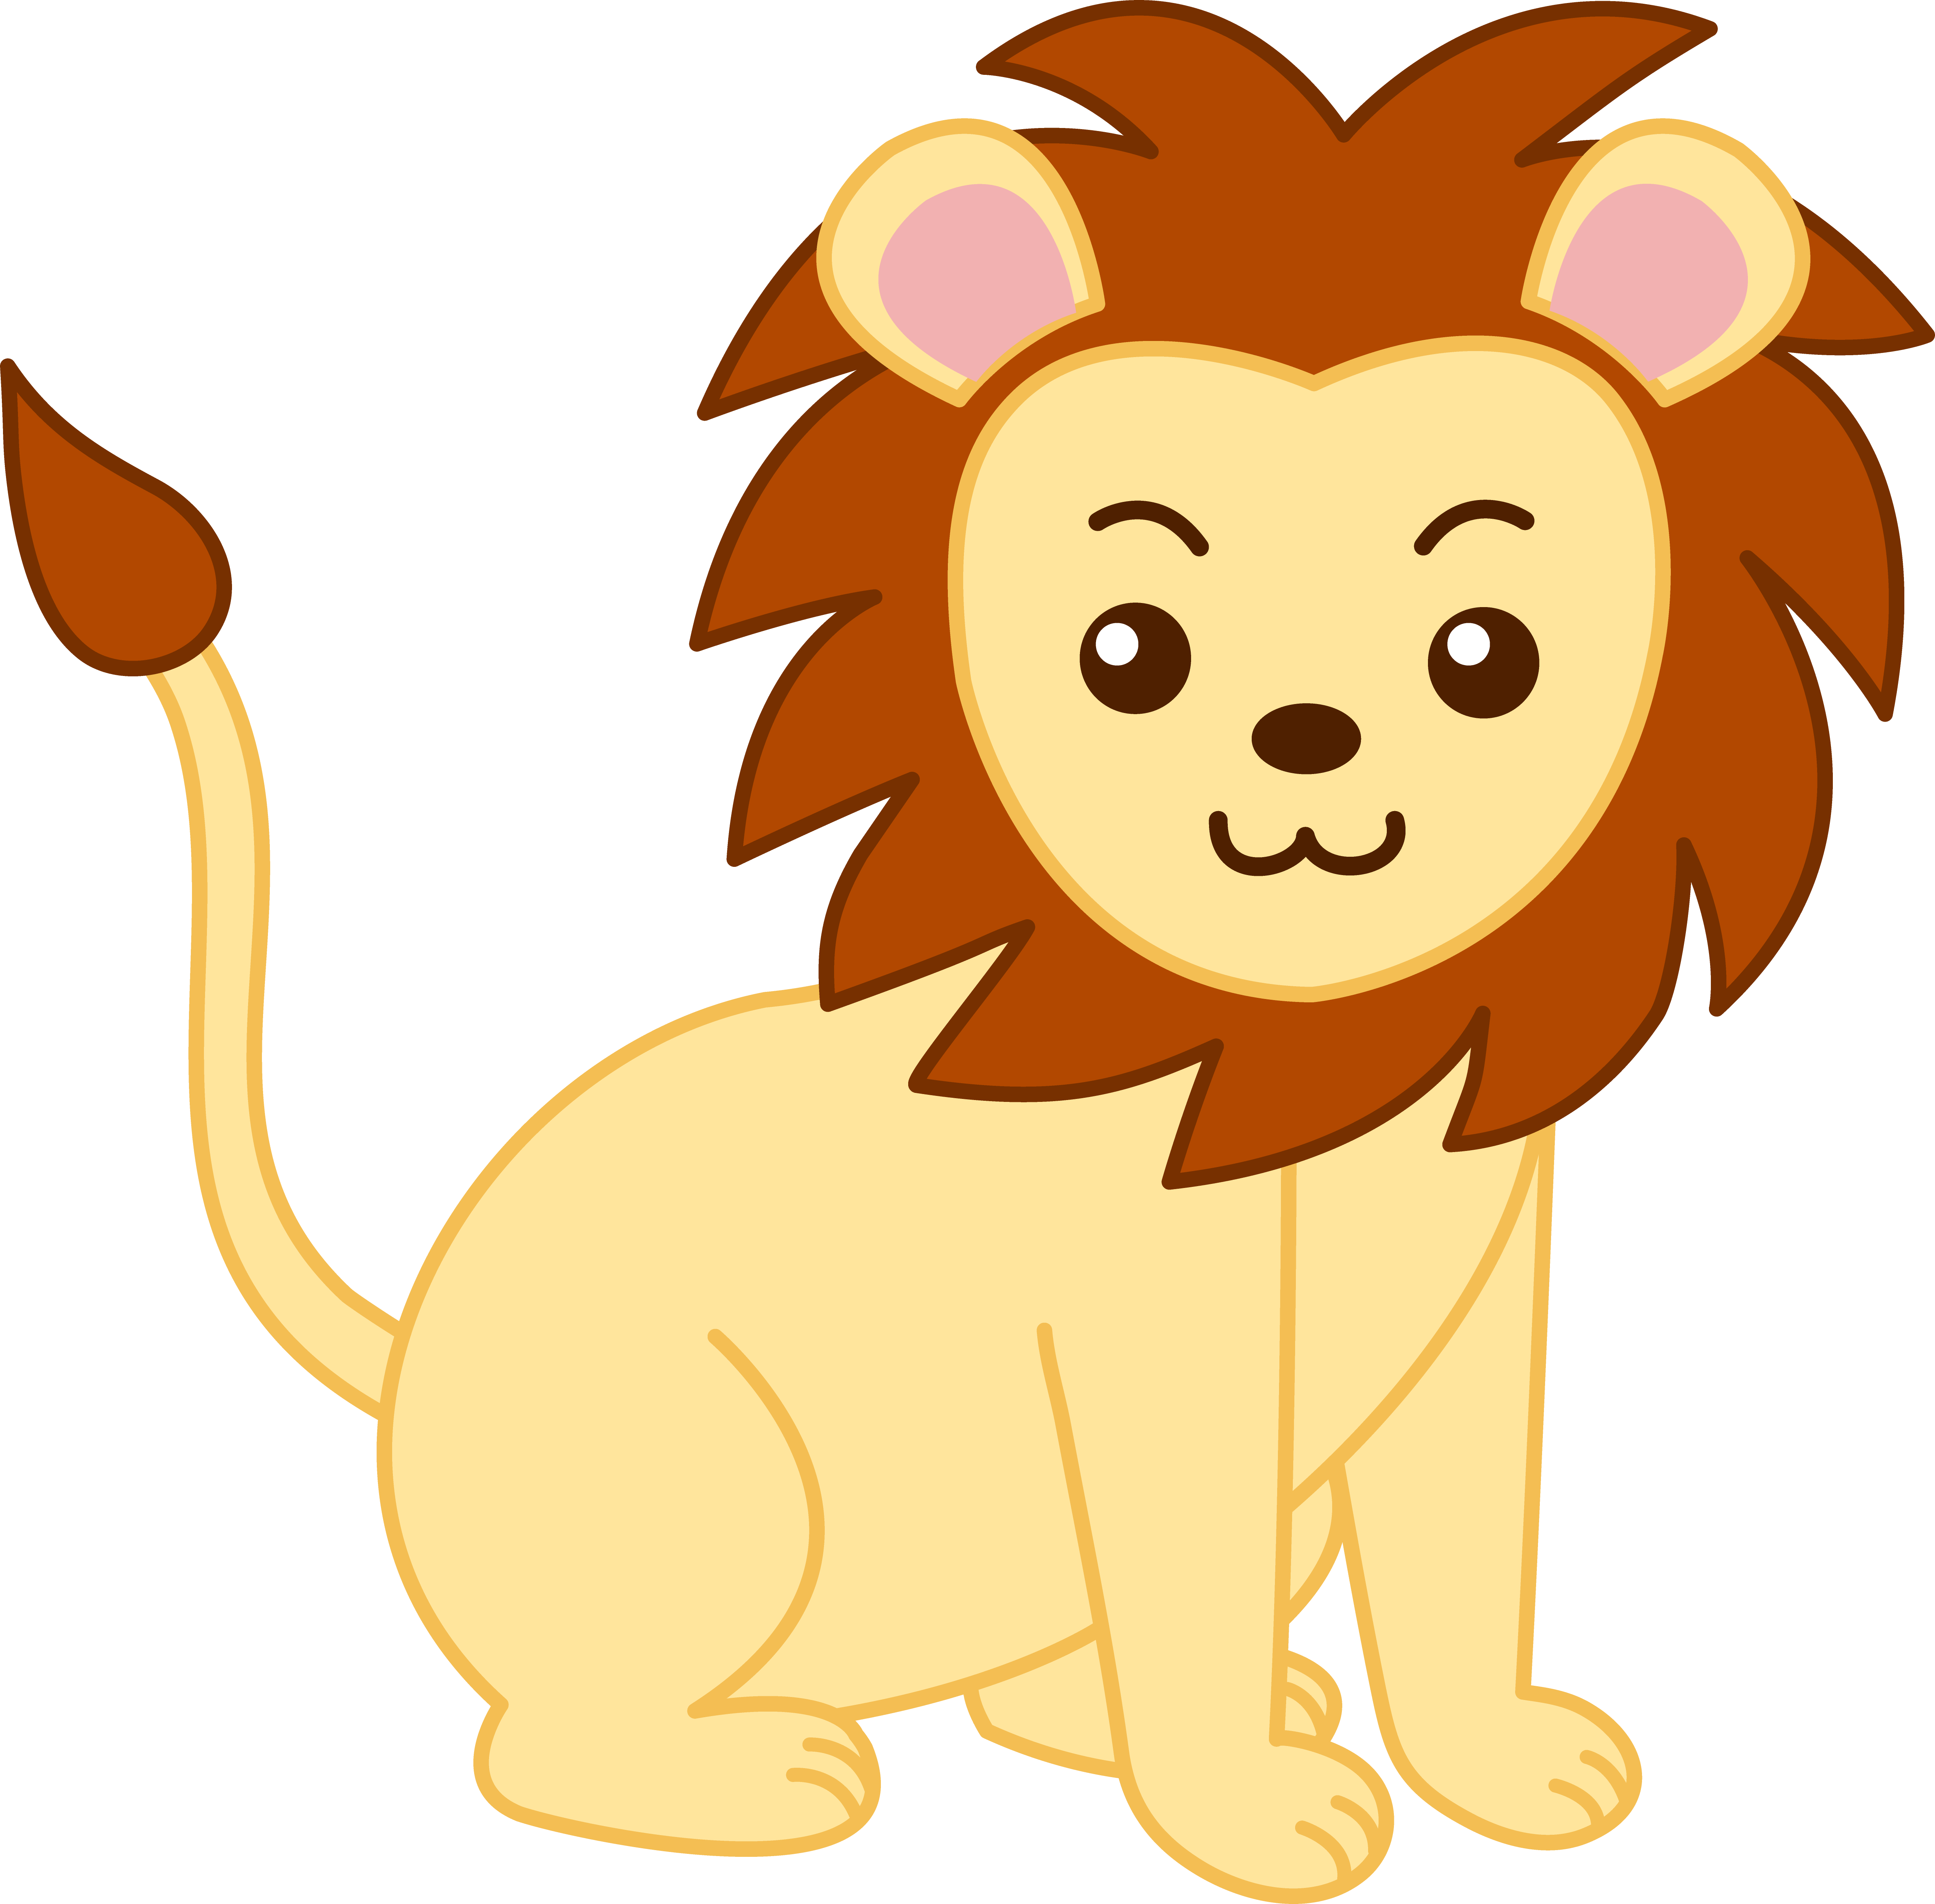 Baby Lion Clipart Black And White | Clipart Panda - Free Clipart ...